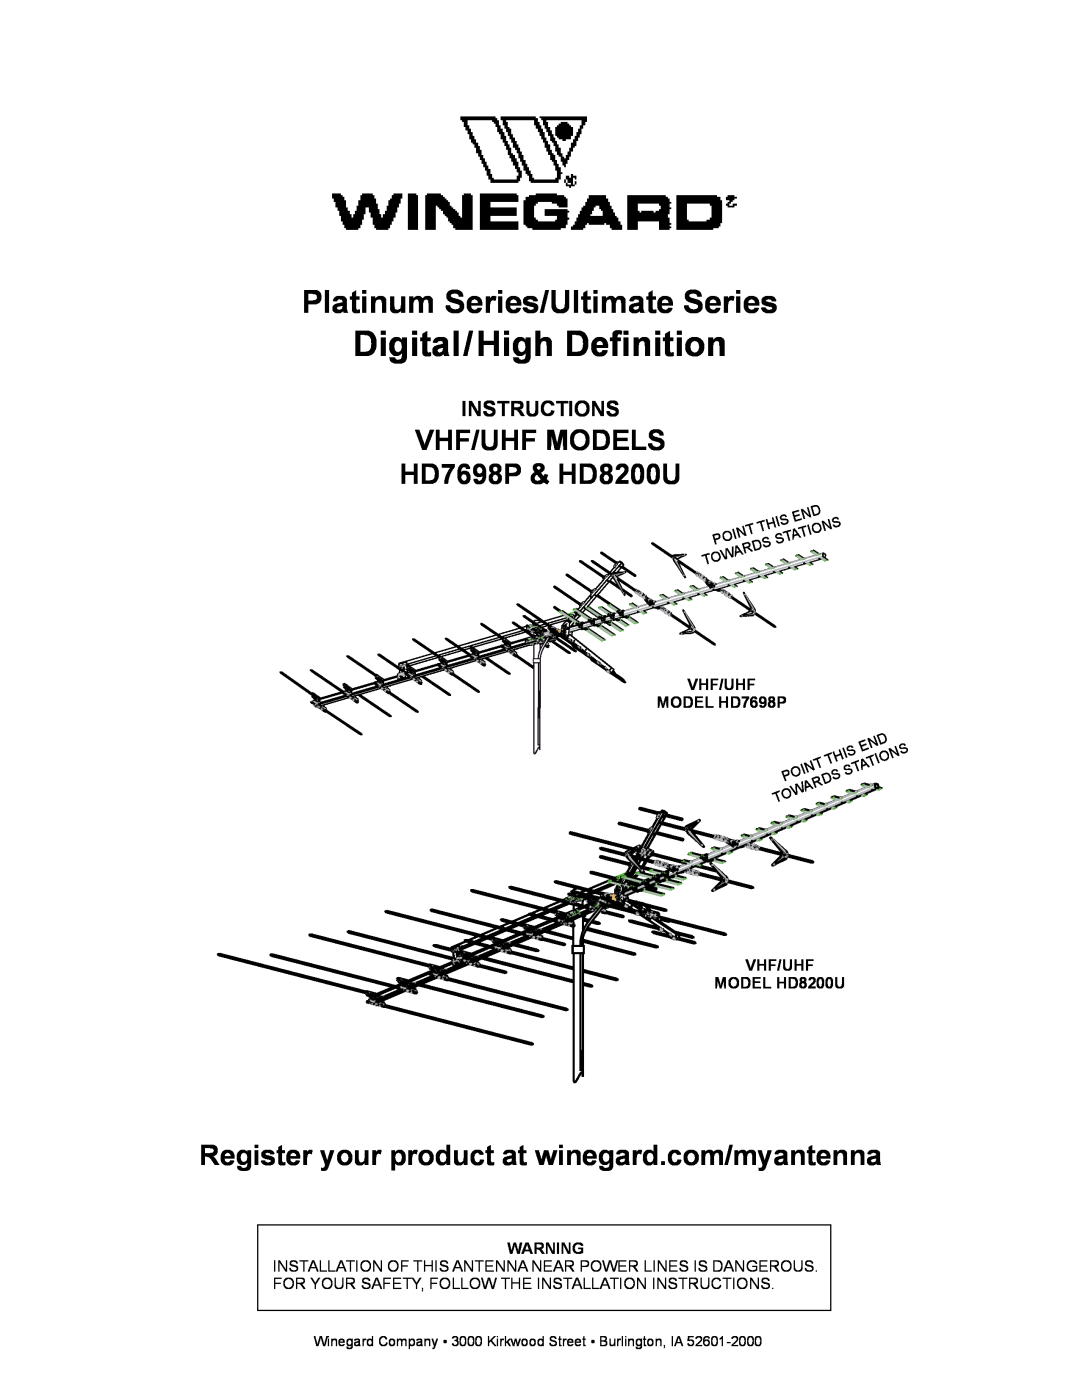 Winegard HD7698P installation instructions Digital/High Definition, Platinum Series/Ultimate Series, Instructions, This 